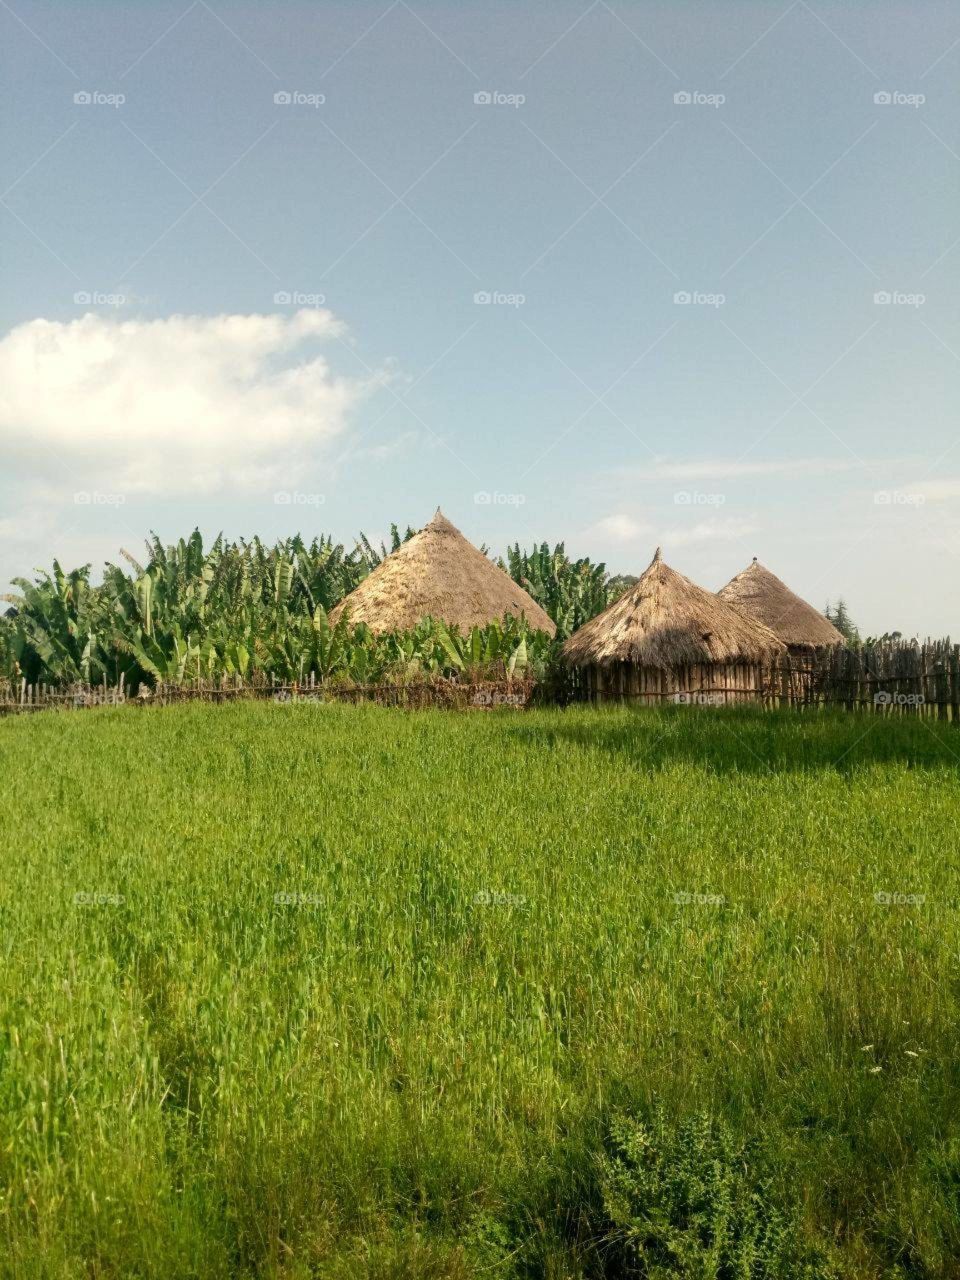 butfuall place in ethiopia